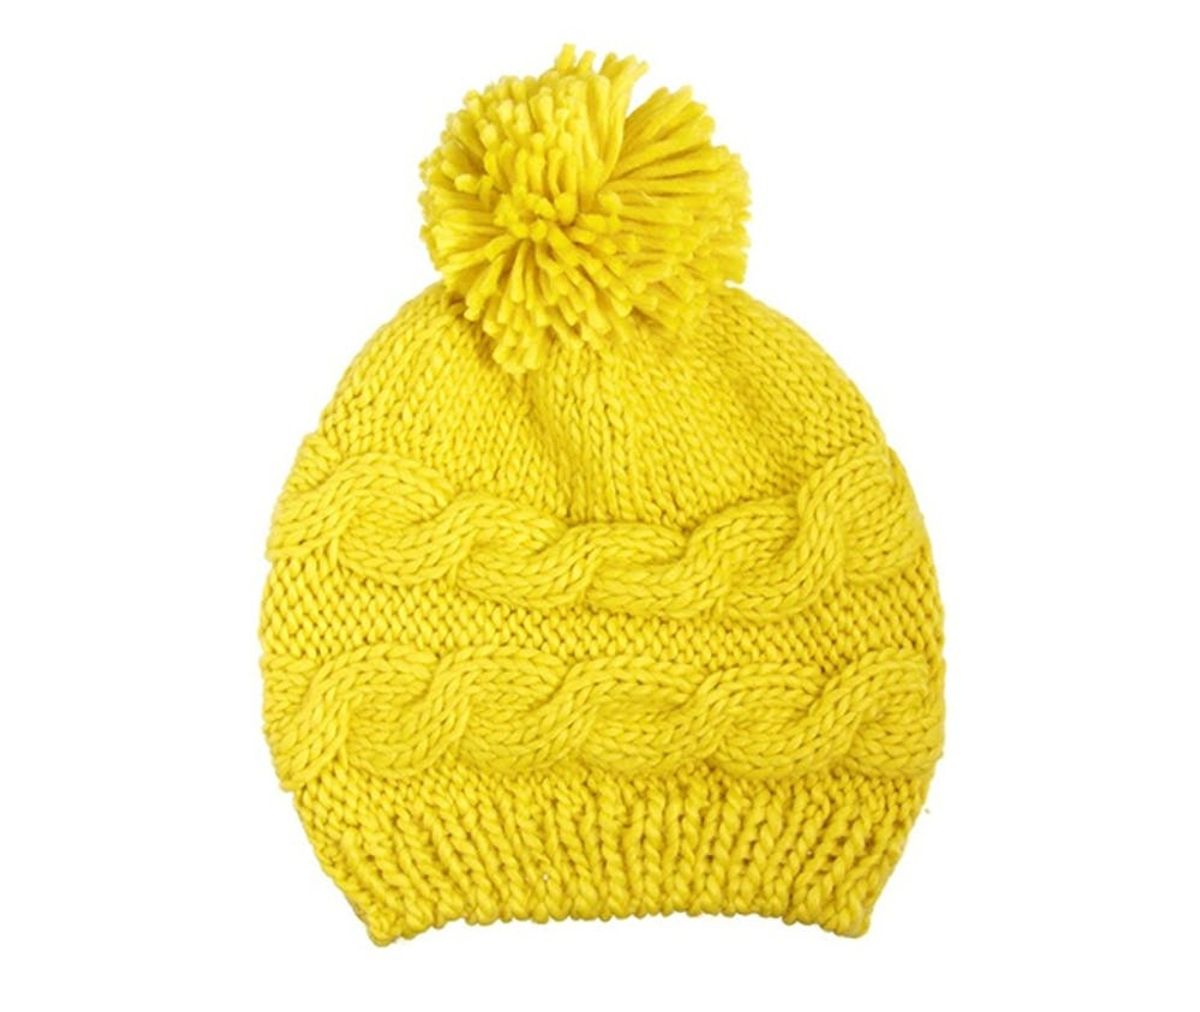 I Dream of Beanies: 14 Must-Have Caps